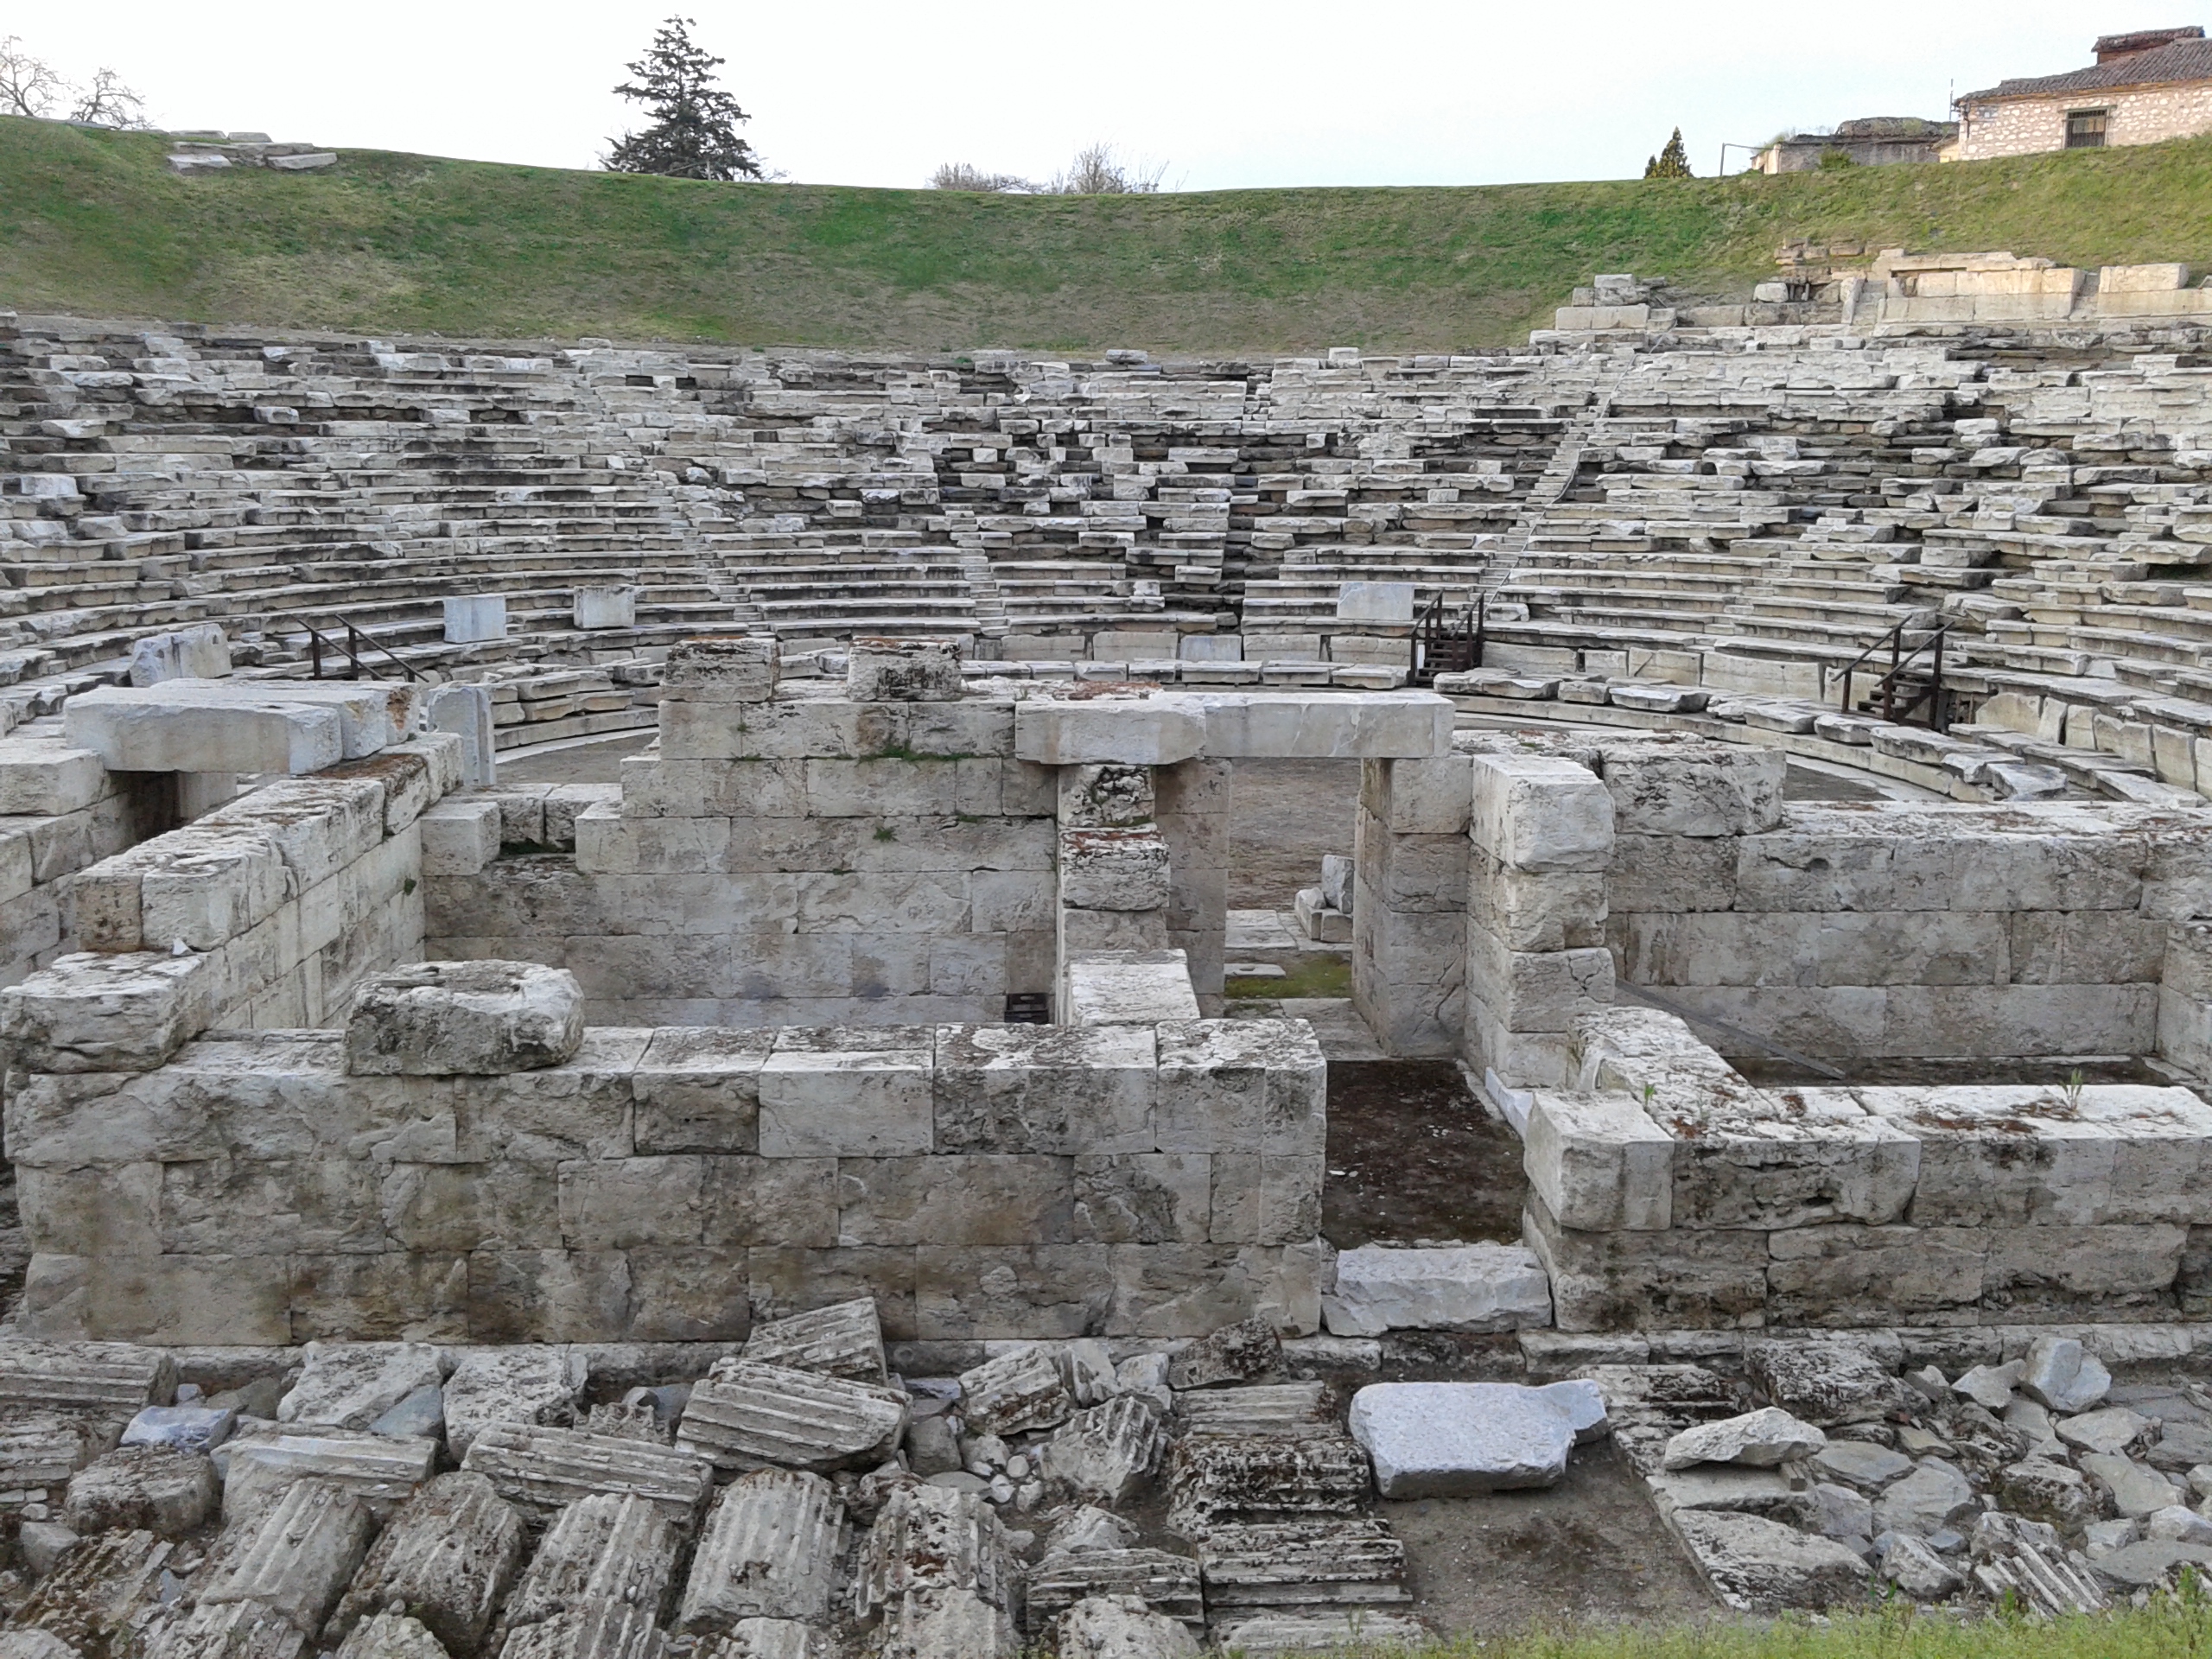 File:First Ancient Theater of Larisa.jpg - Wikimedia Commons